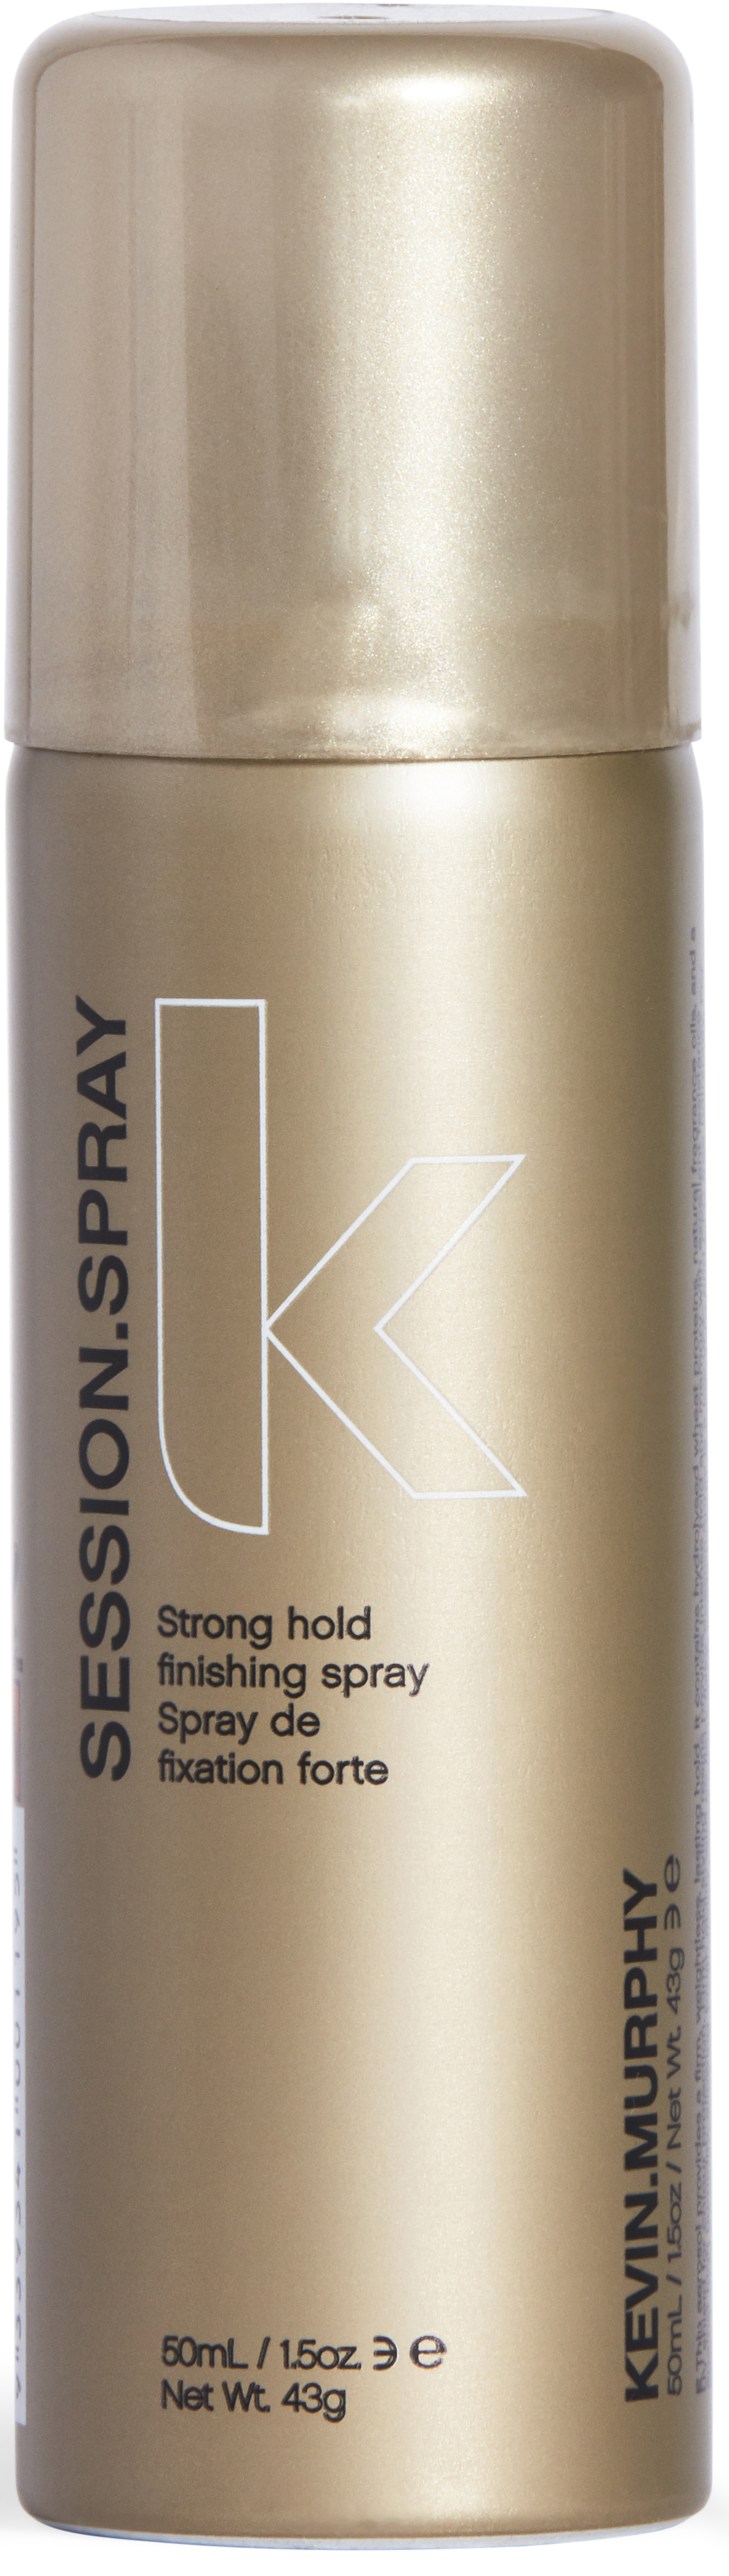 Kevin Murphy Session Spray 50ml